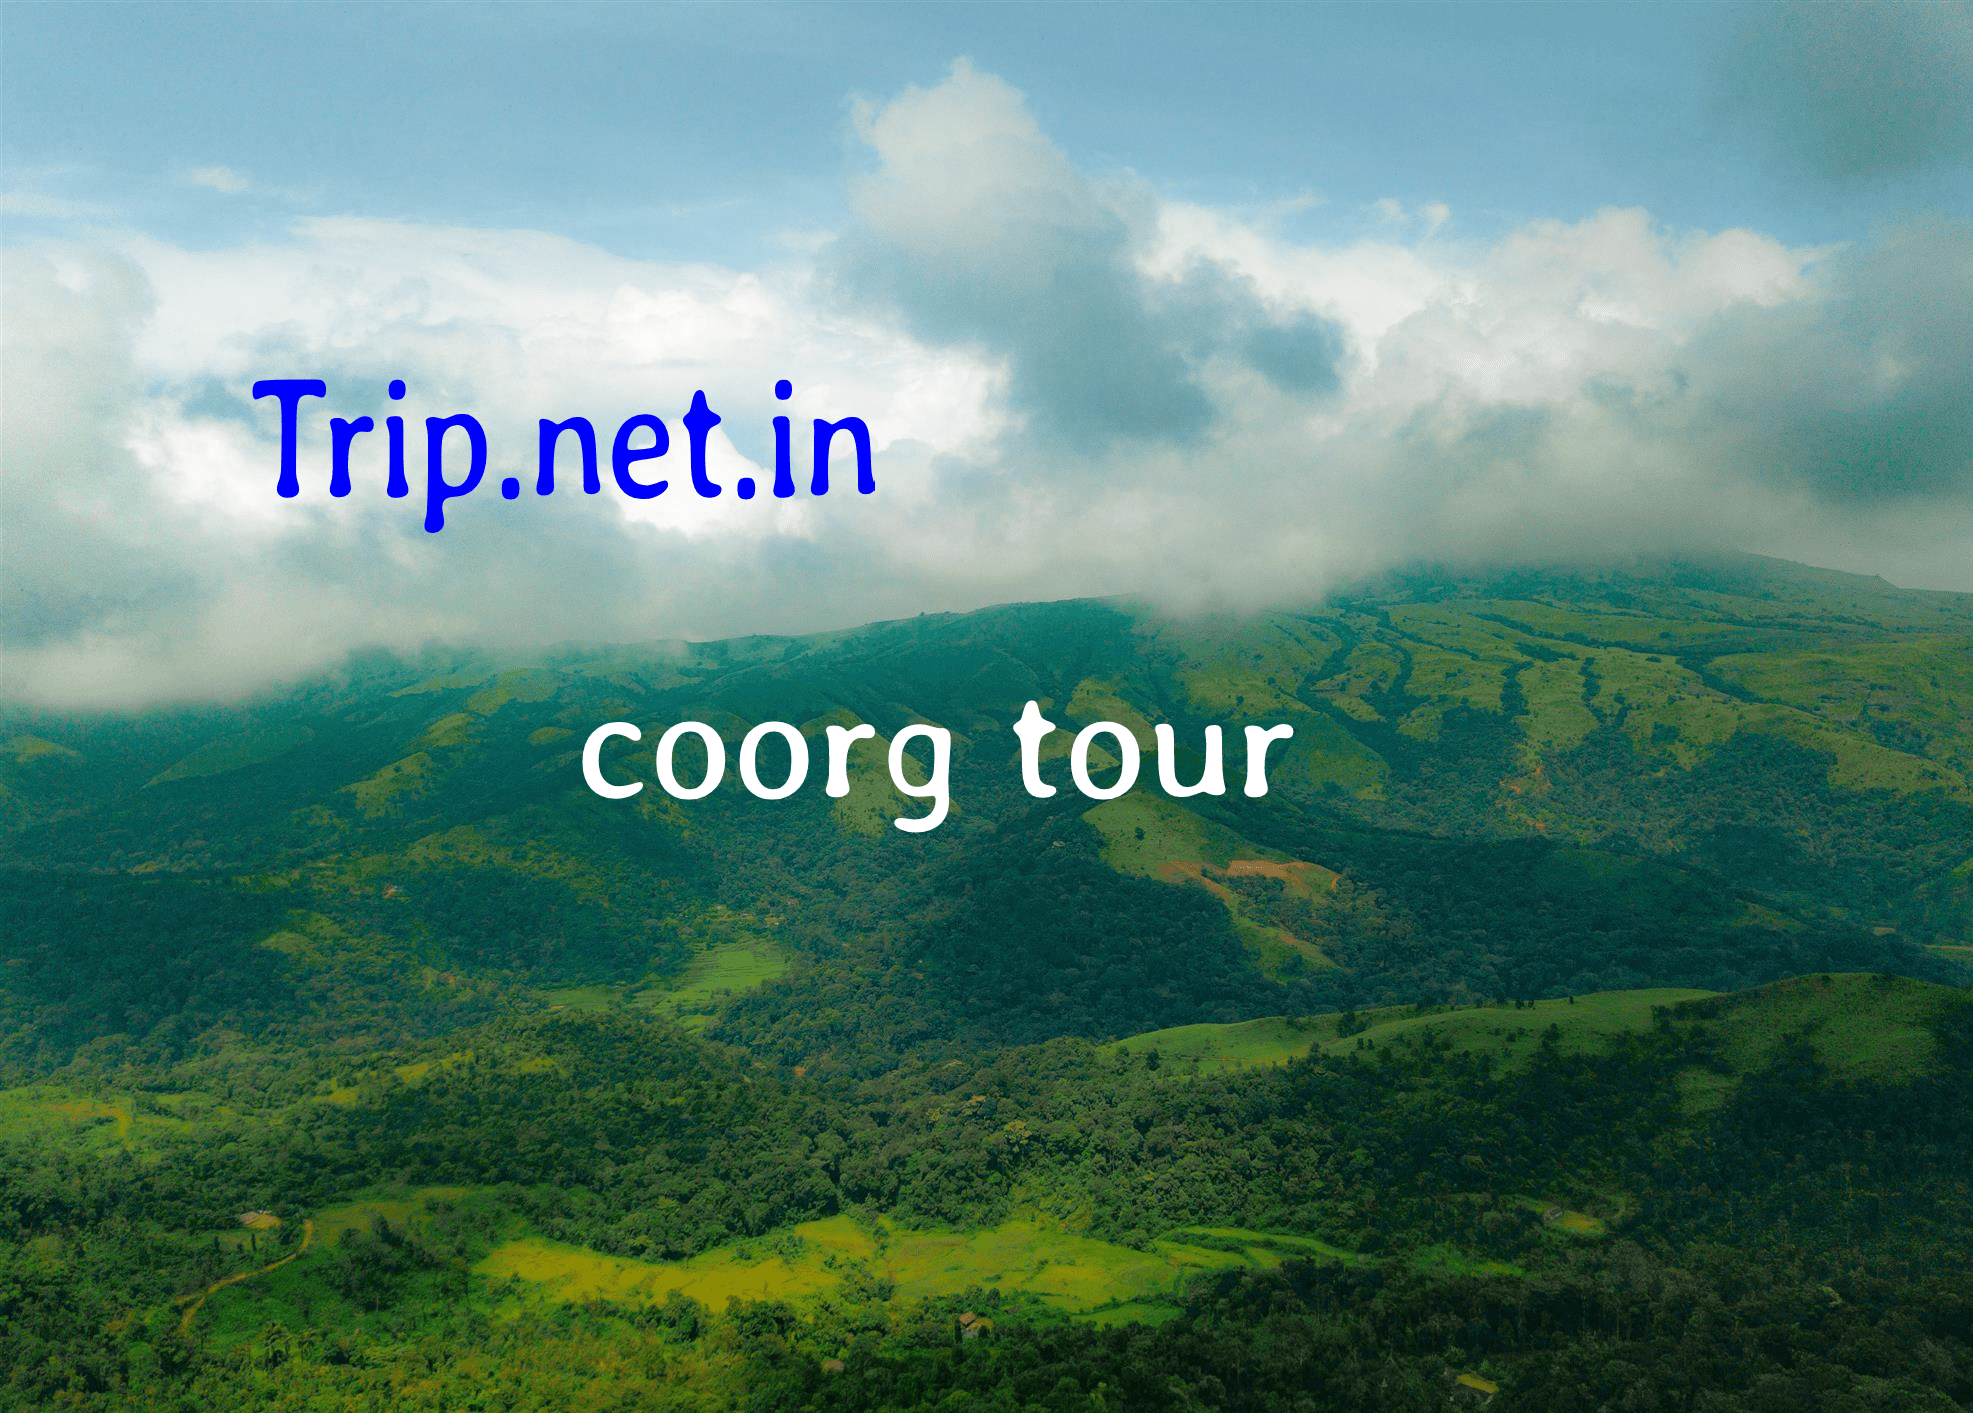 coorg tour packages, coorg tour packages from kannur, coorg packages karnataka tourism, coorg tour packages from udupi, bangalore to coorg package tour kstdc, kesari coorg packages, bangalore to coorg package by car, coorg tour Packages review, coorg packages by Bus